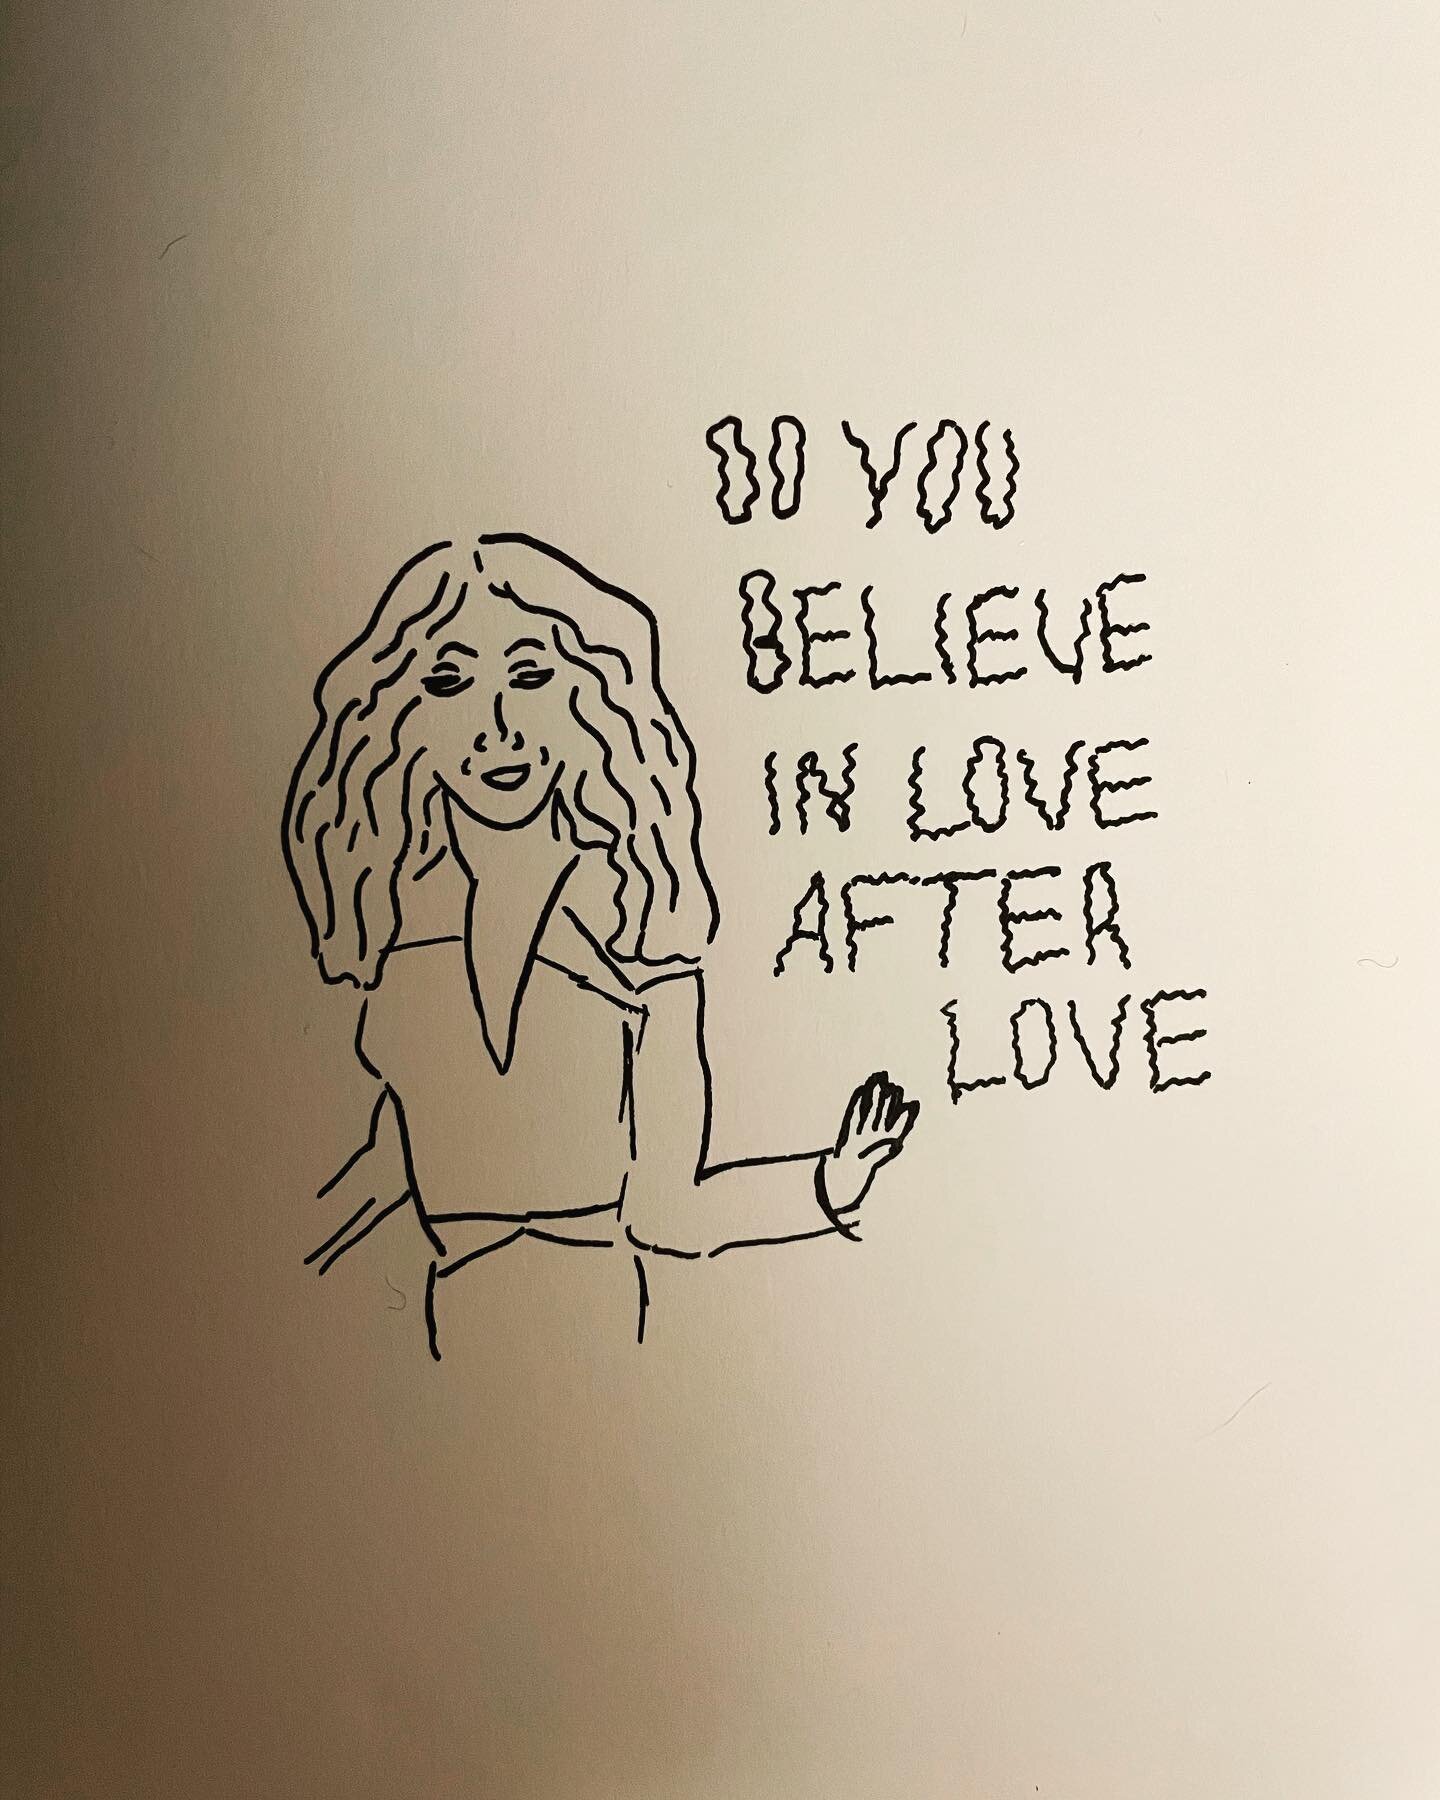 That&rsquo;s not supposed to be Cher but it ended up looking like her. I f***ed up the lyrics but I like it. Love after love? I think it works.

Who do you think the other one is?

Inspired to draw some characters from this Where&rsquo;s Wally style 